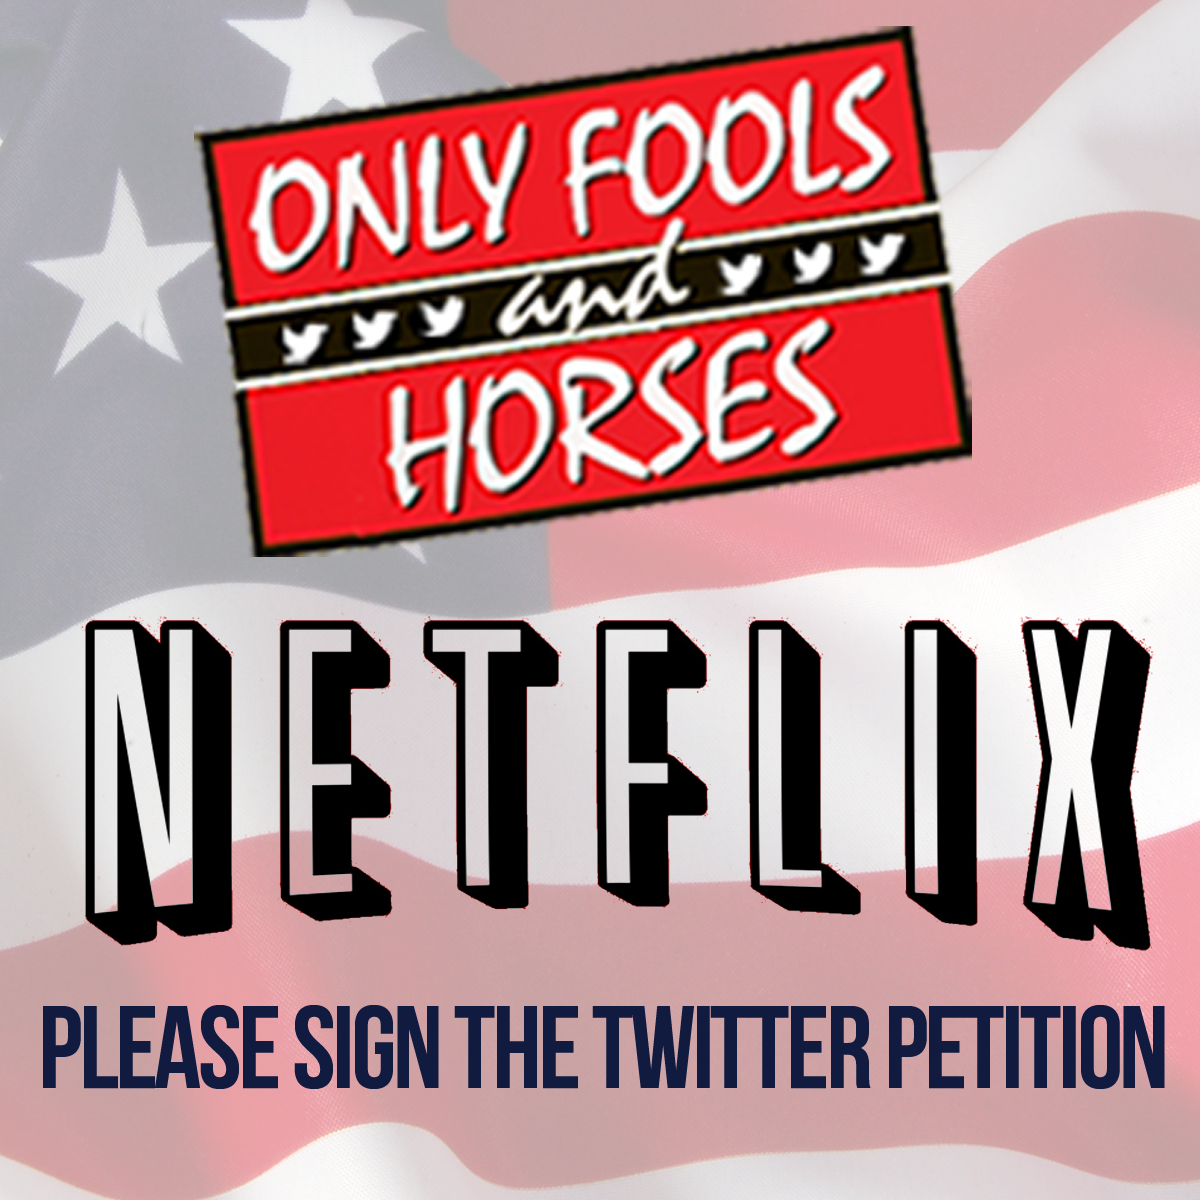 Hey! Keep signing this: twitition.com/cd5p6/ and tweeting #OnlyFoolsNetflix @netflix